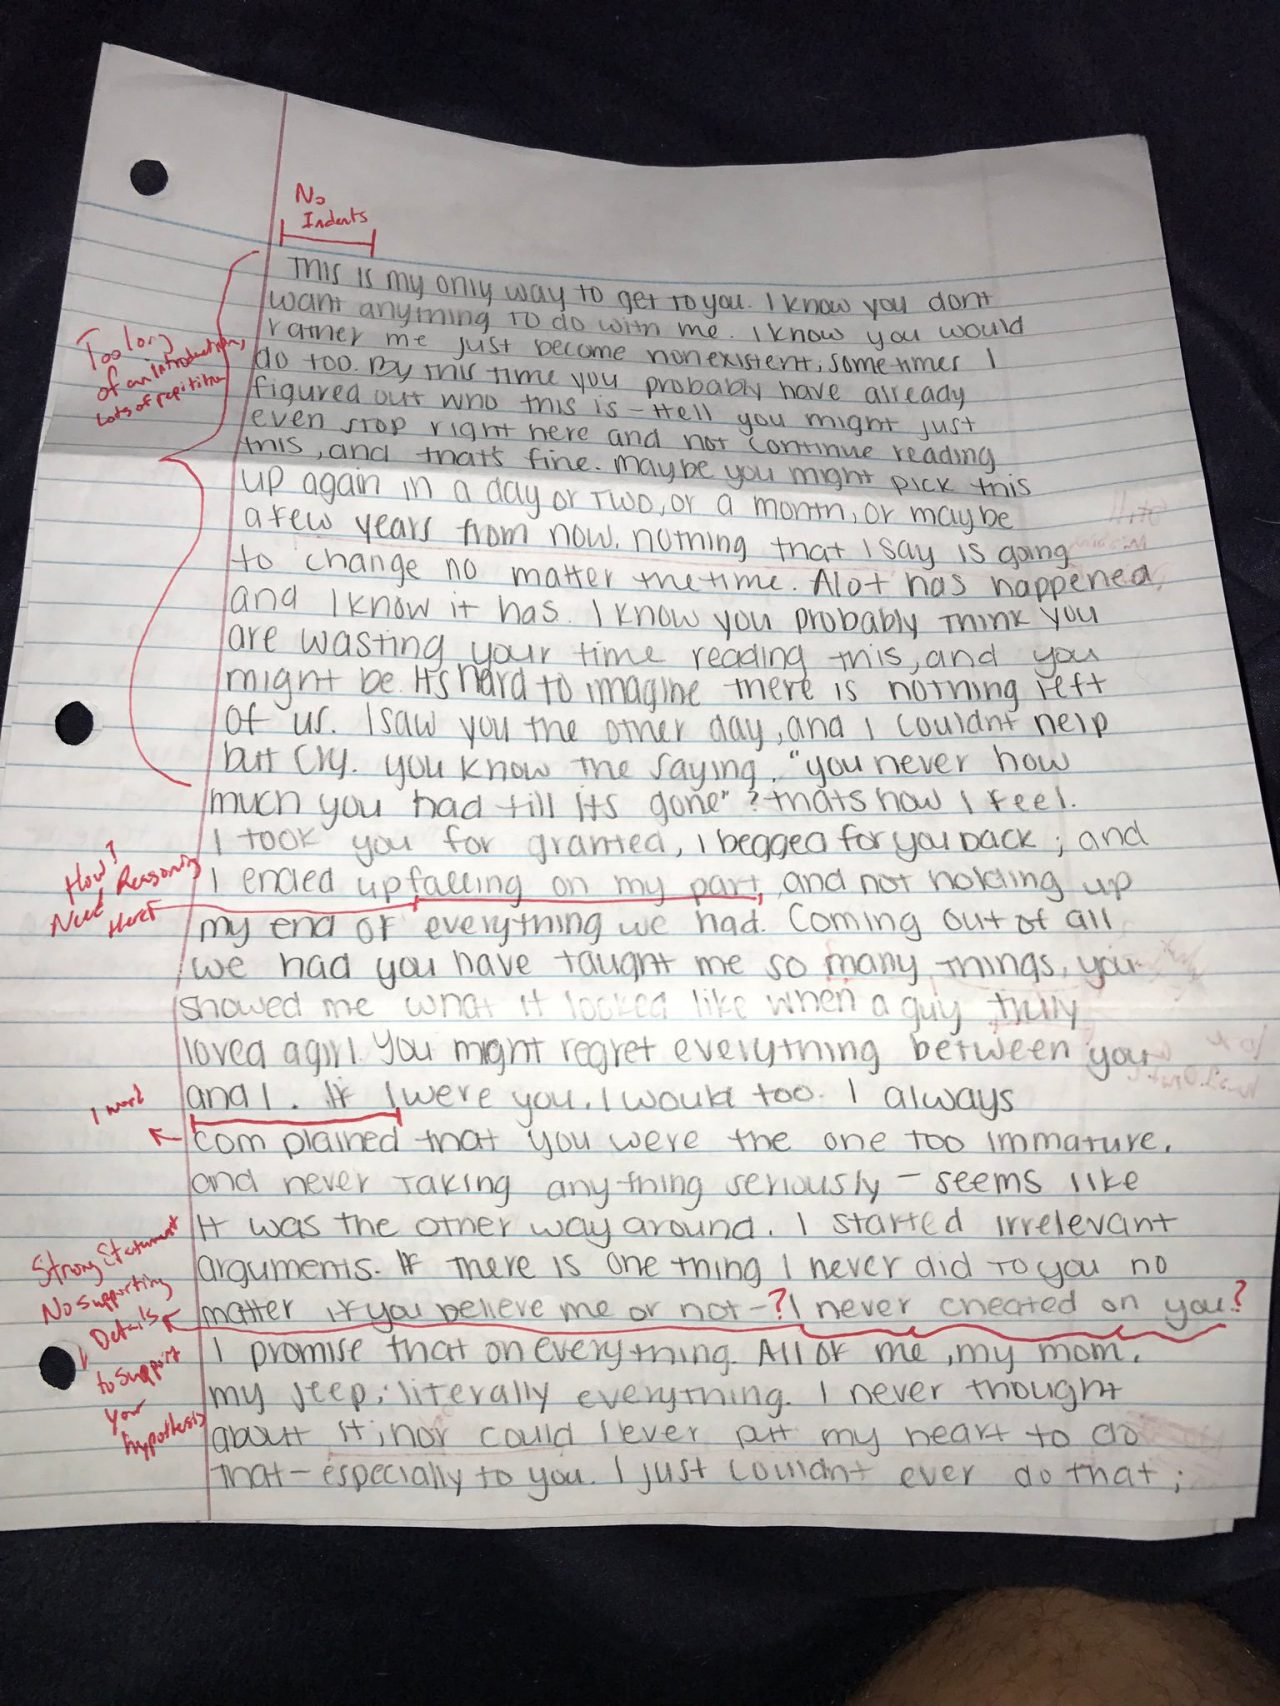 This bloke's ex wrote him an apology letter, and he sent it back graded and critiqued